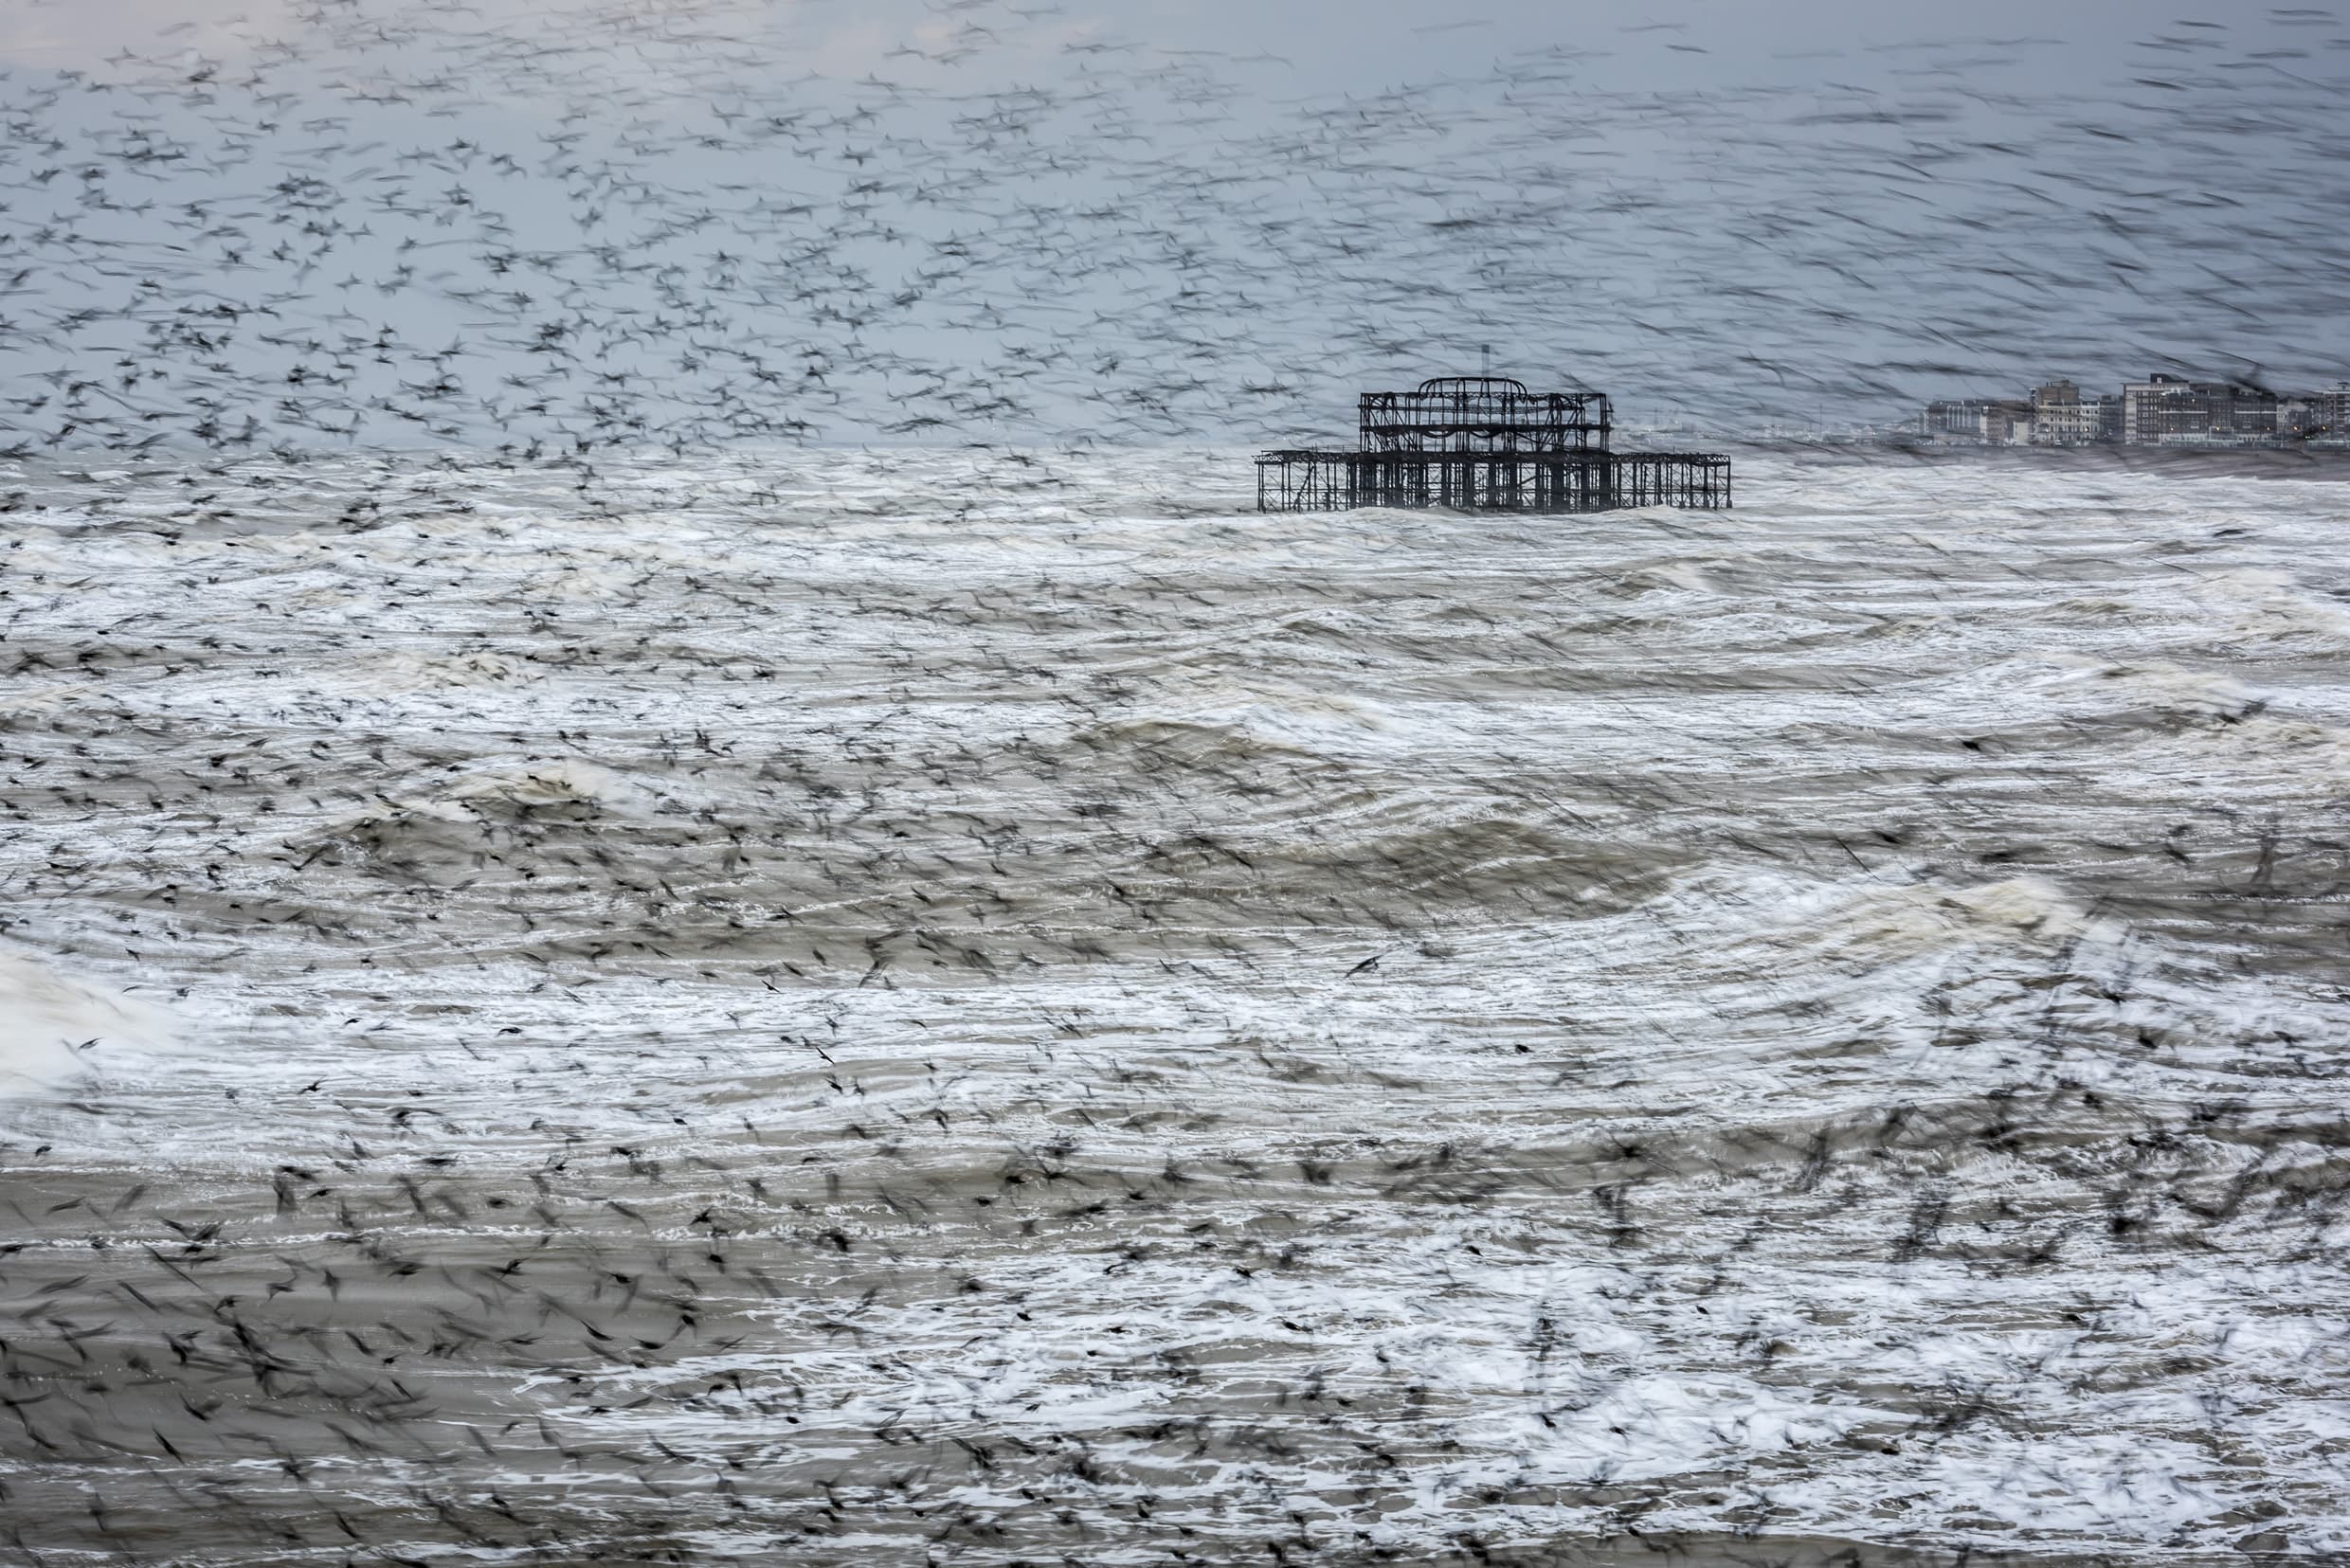 Grand winner: 'Brighton Pier during the winter starling murmuration, East Sussex, England'. Image by Matthew Cattell